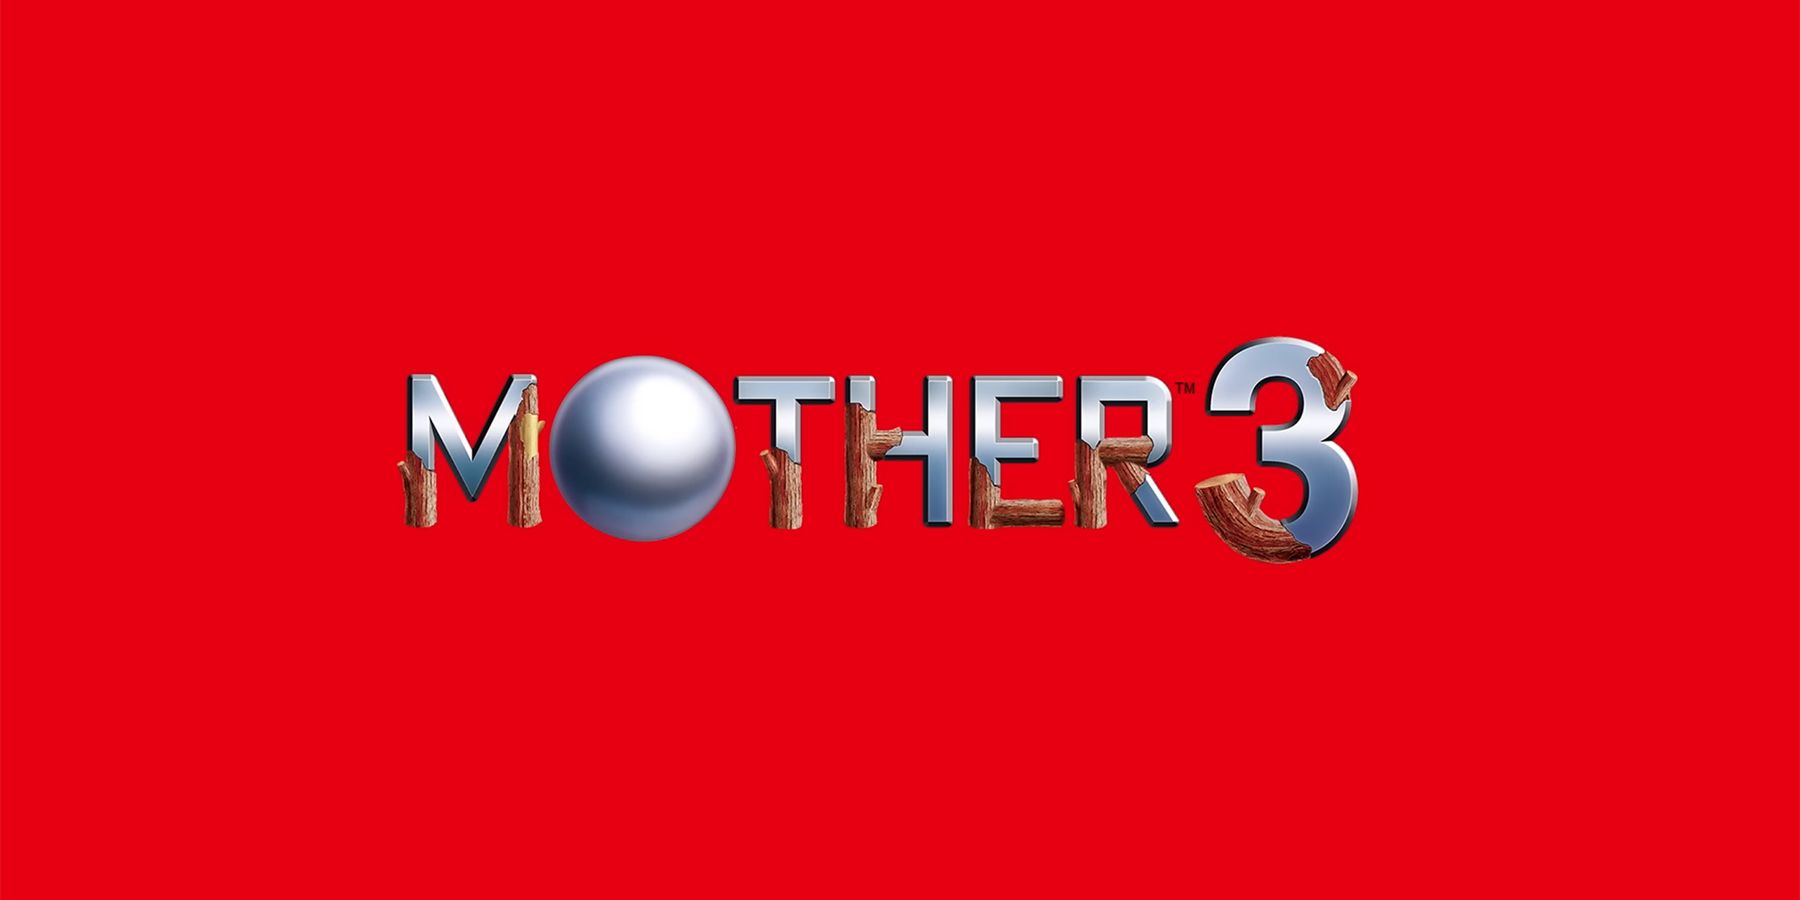 mother-3-title-banner